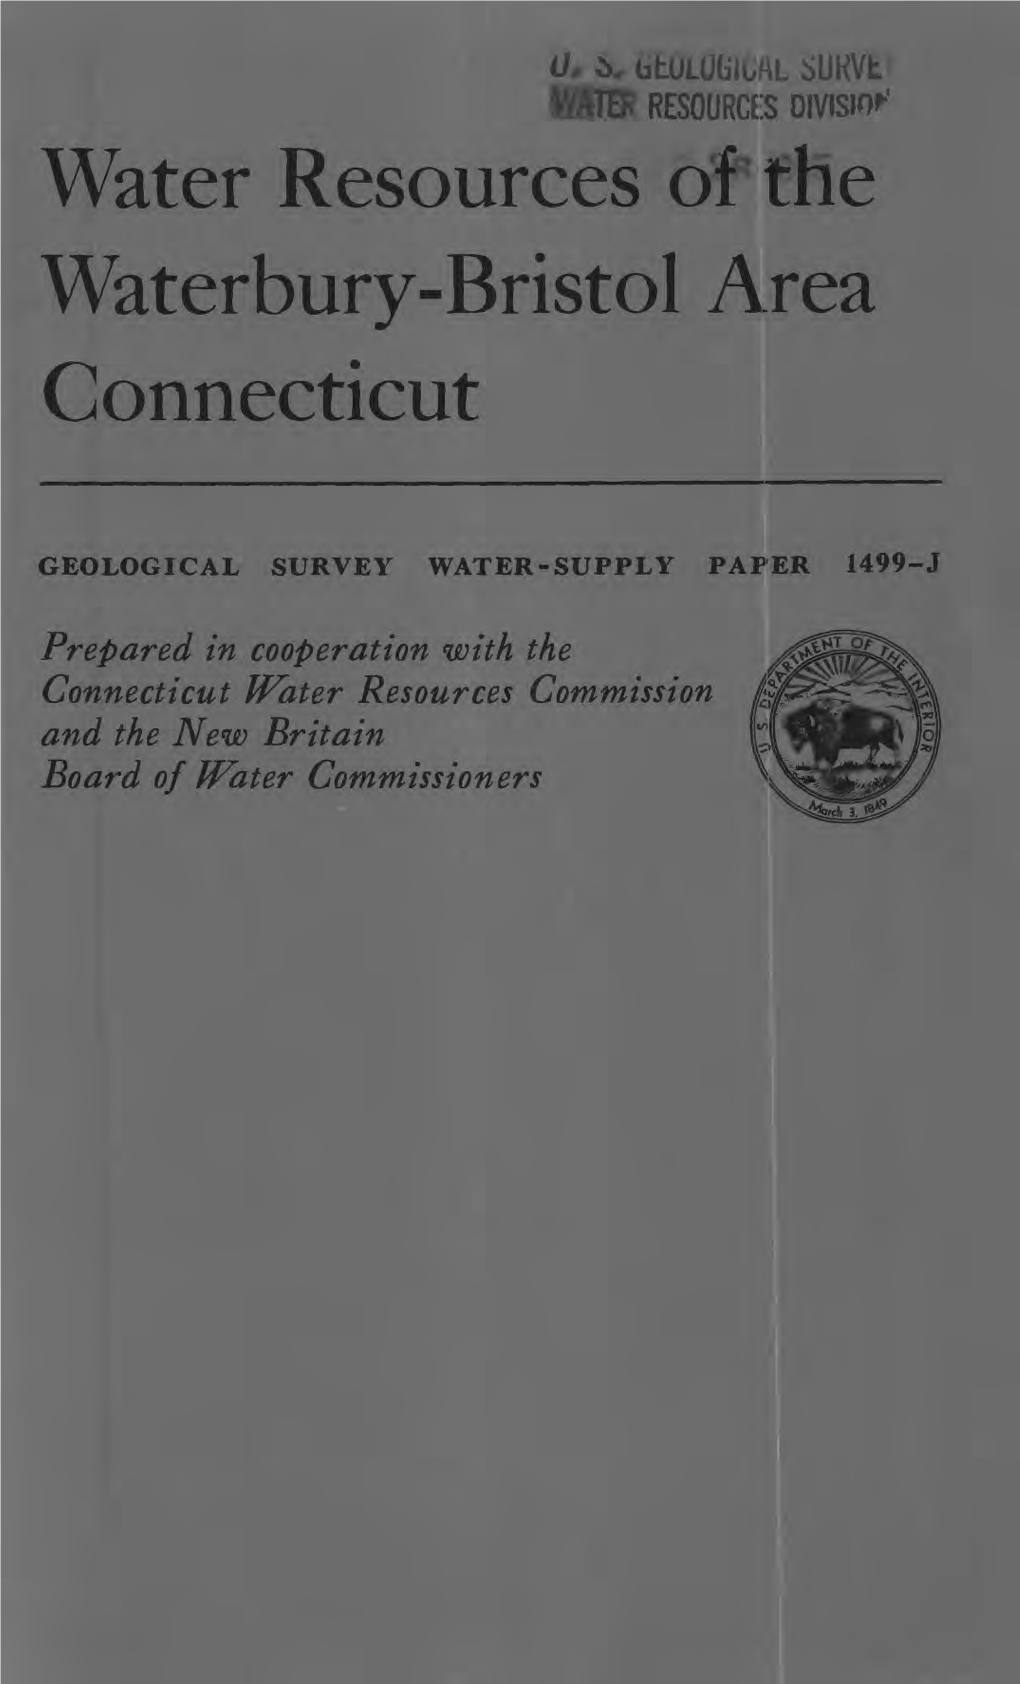 Water Resources of the Waterbury-Bristol Area Connecticut